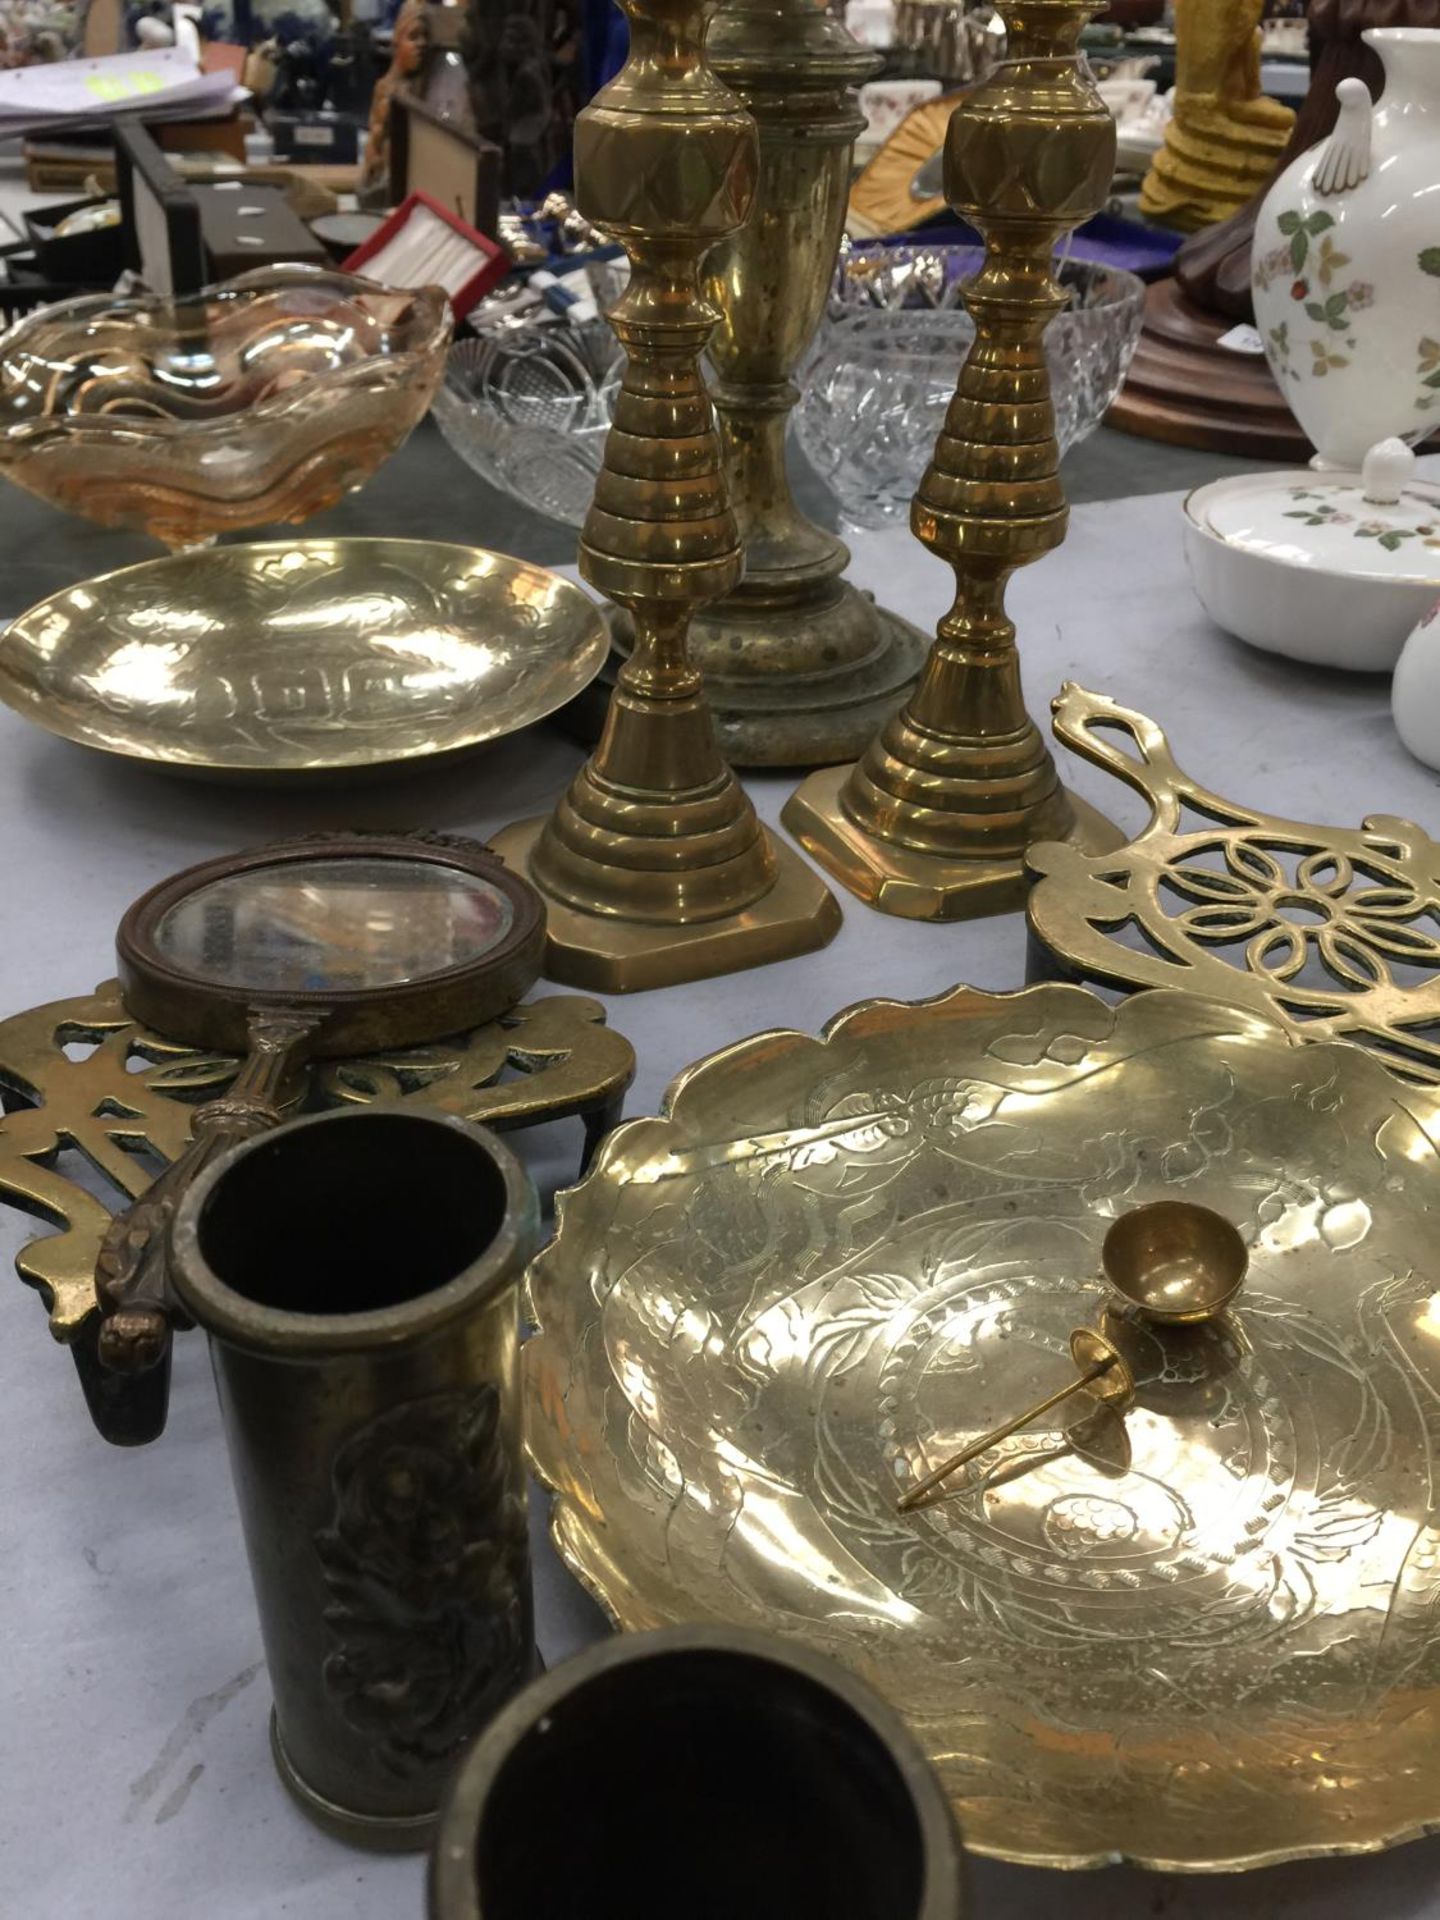 A QUANTITY OF BRASSWARE TO INCLUDE A PLANT HOLDER, CANDLESTICKS, TRIVETS, BOWLS, ETC - Image 8 of 9